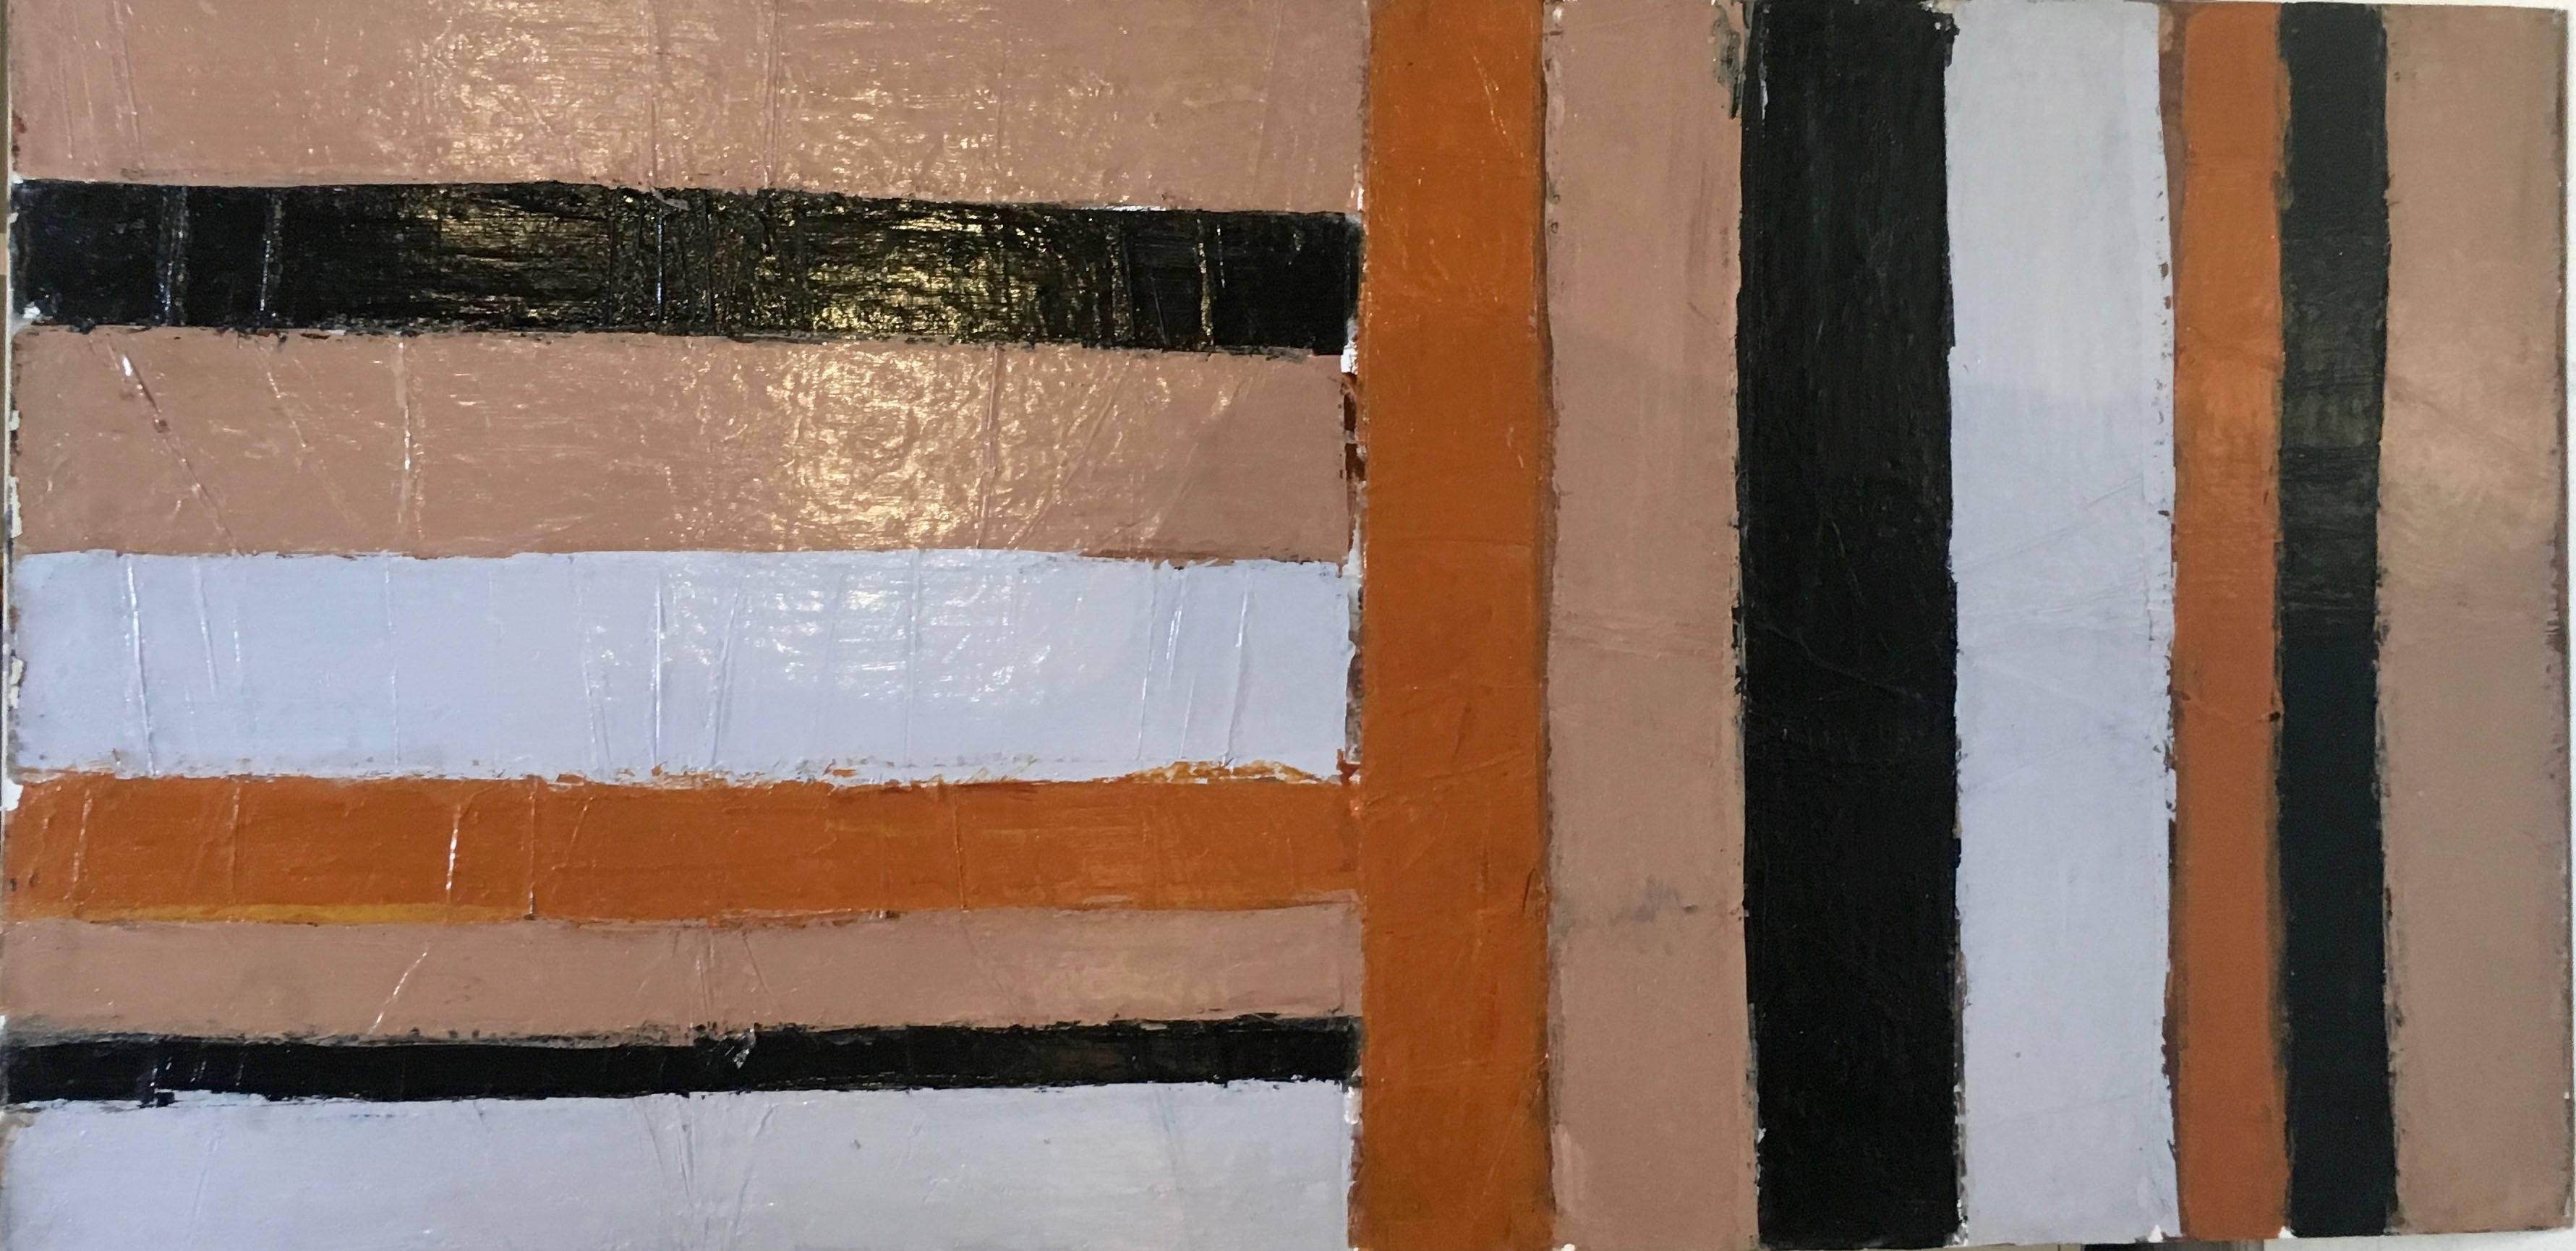 Painted in 1979, with thick impasto strokes of orange, peach, black and white this hard edged abstract oil painting measures an impressive 6' x 3' wide. Composed of two canvases seamlessly joined together, by listed artist Abe Lubelski, founder of